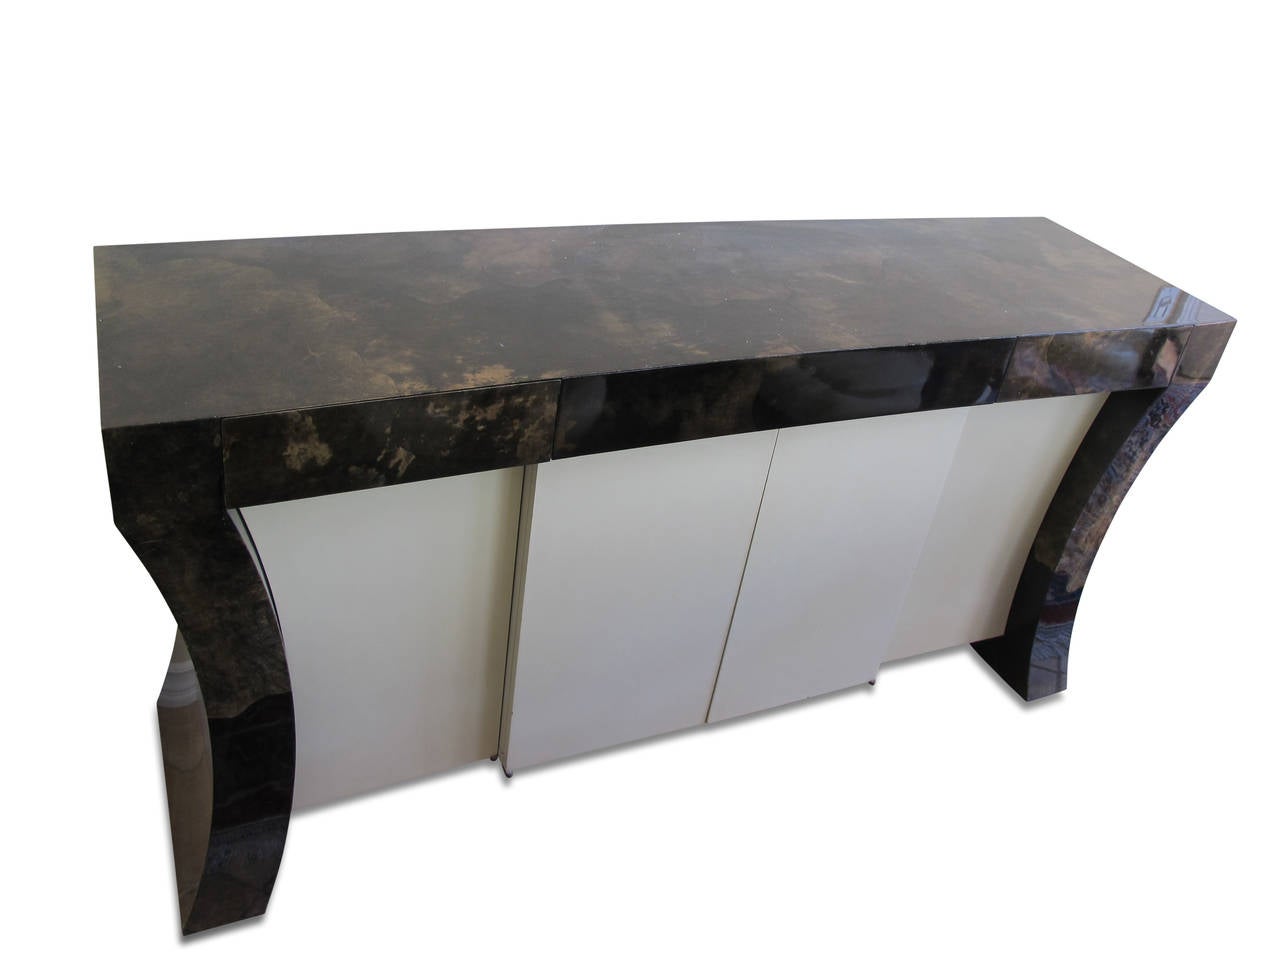 Very attractive Karl Springer goat hide console custom-made for the home of tennis icon Bjorn Borg in the late 1970s-early 1980s. It is part of the dining set in another listing.